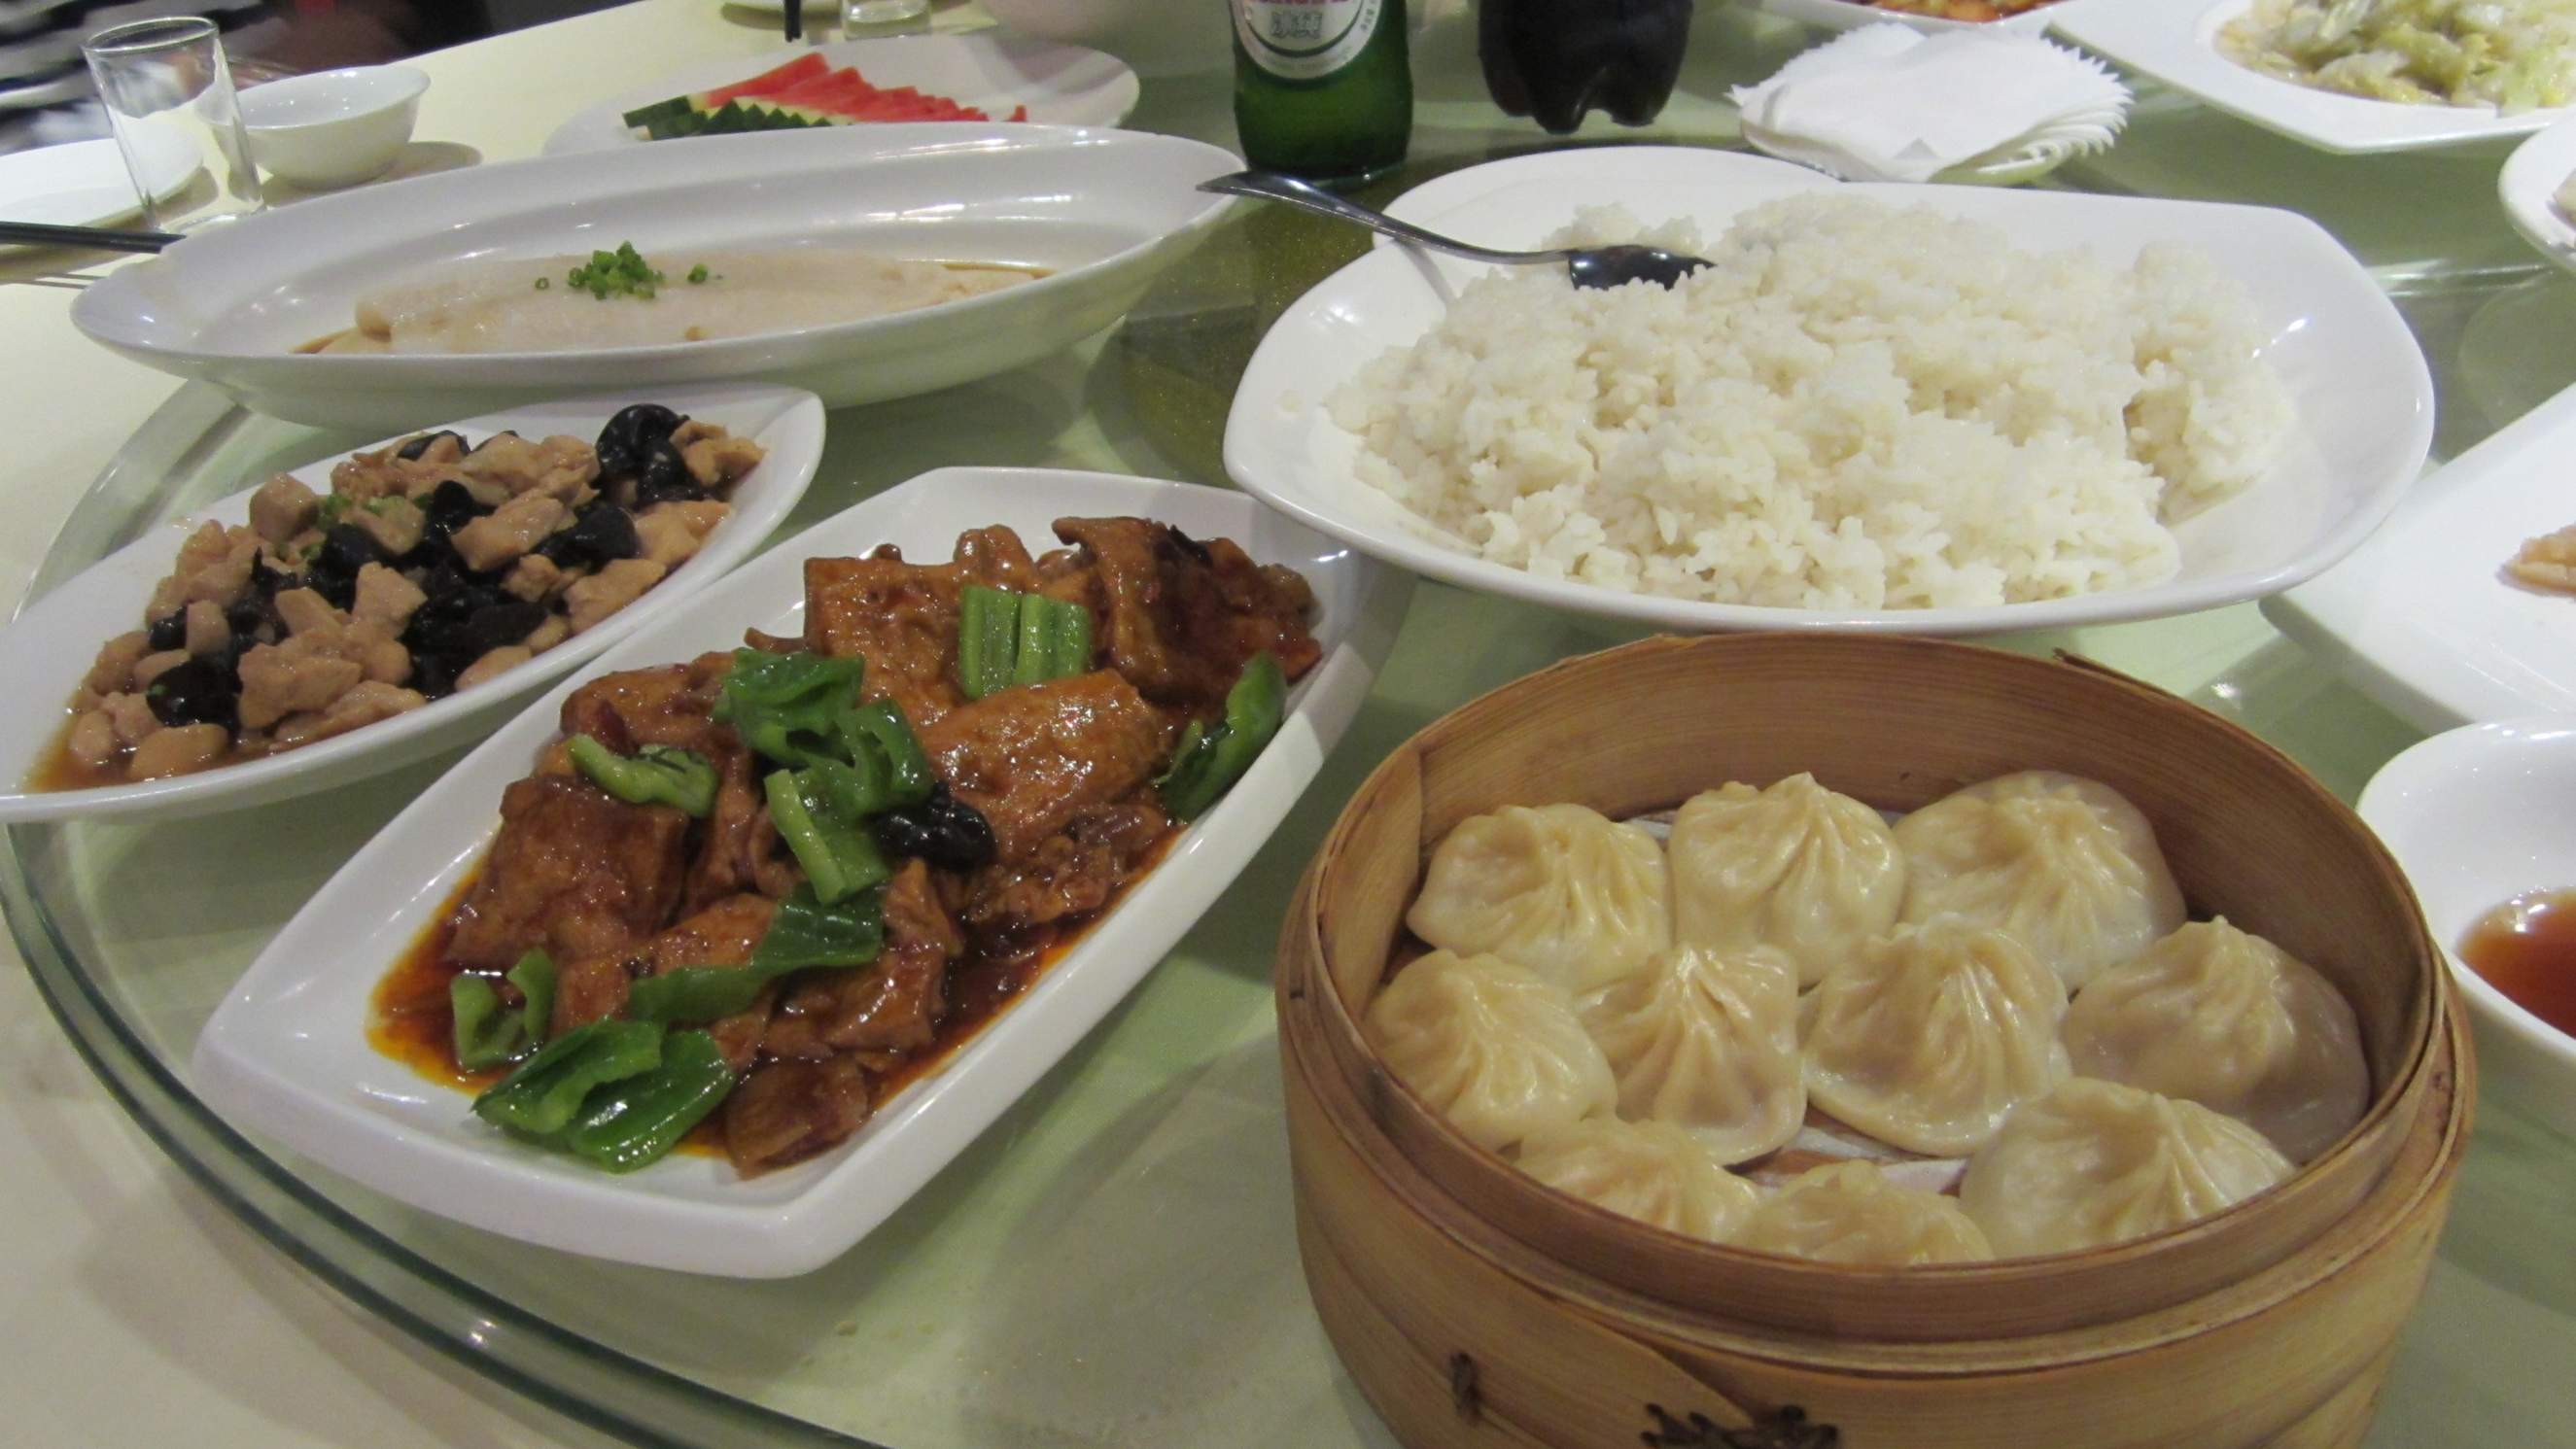 Lunch in Shanghai: fish, chicken and bell peppers, white rice, and Xiaolongbao dumplings.